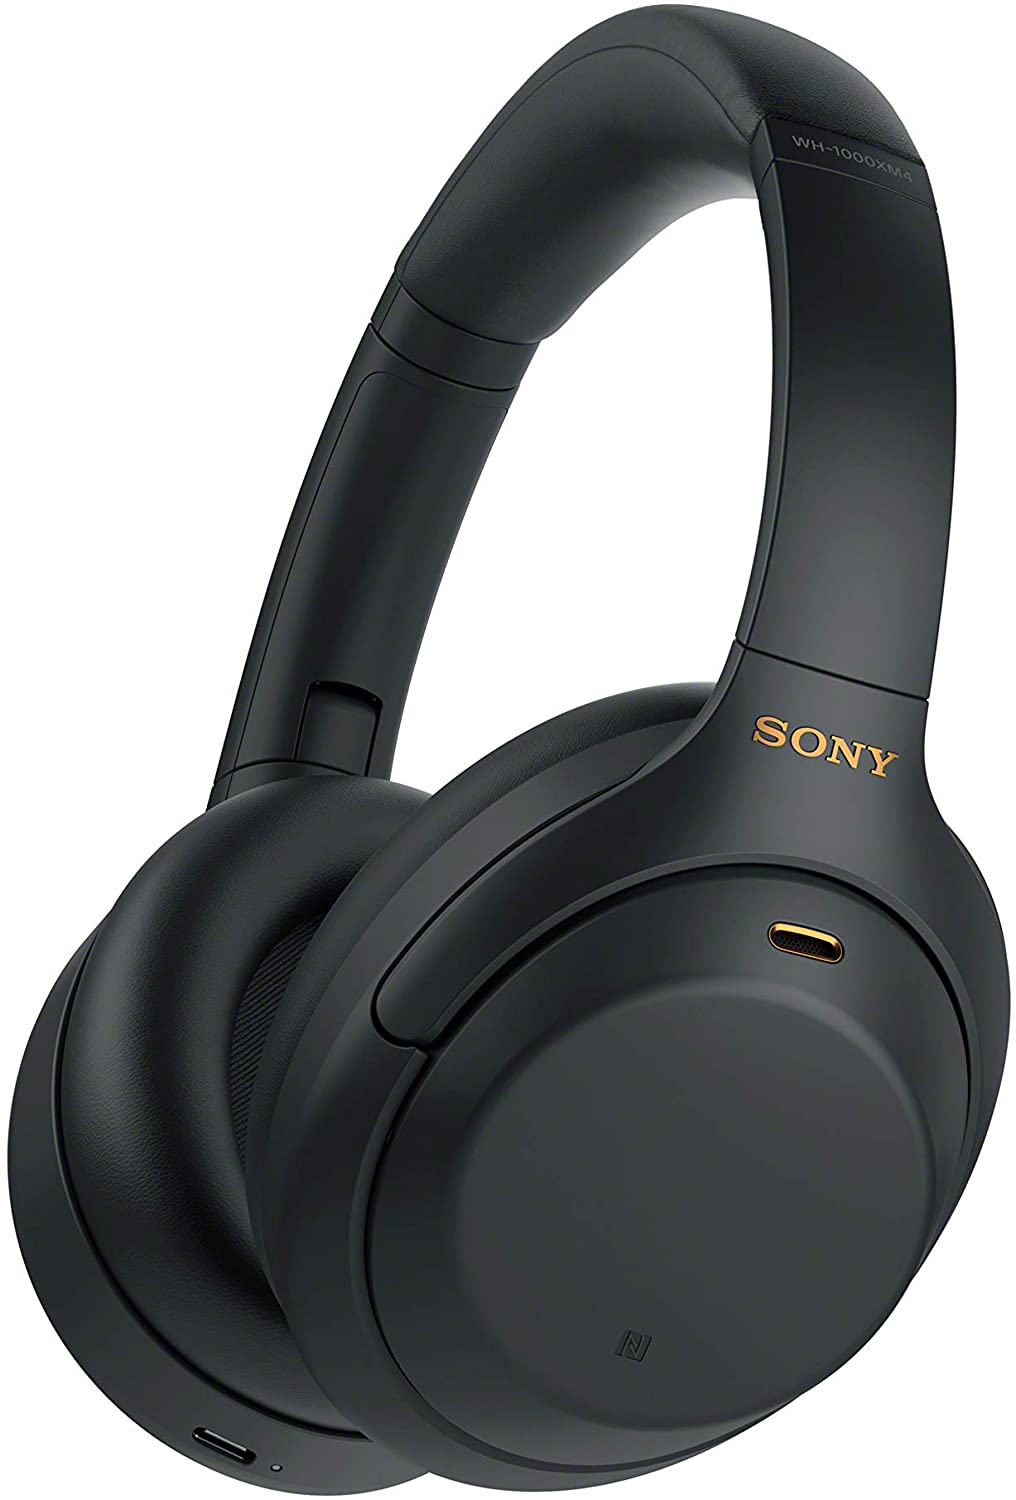 Sony WH-1000XM4 — The Best Wireless  Noise-canceling Headphones with a mic